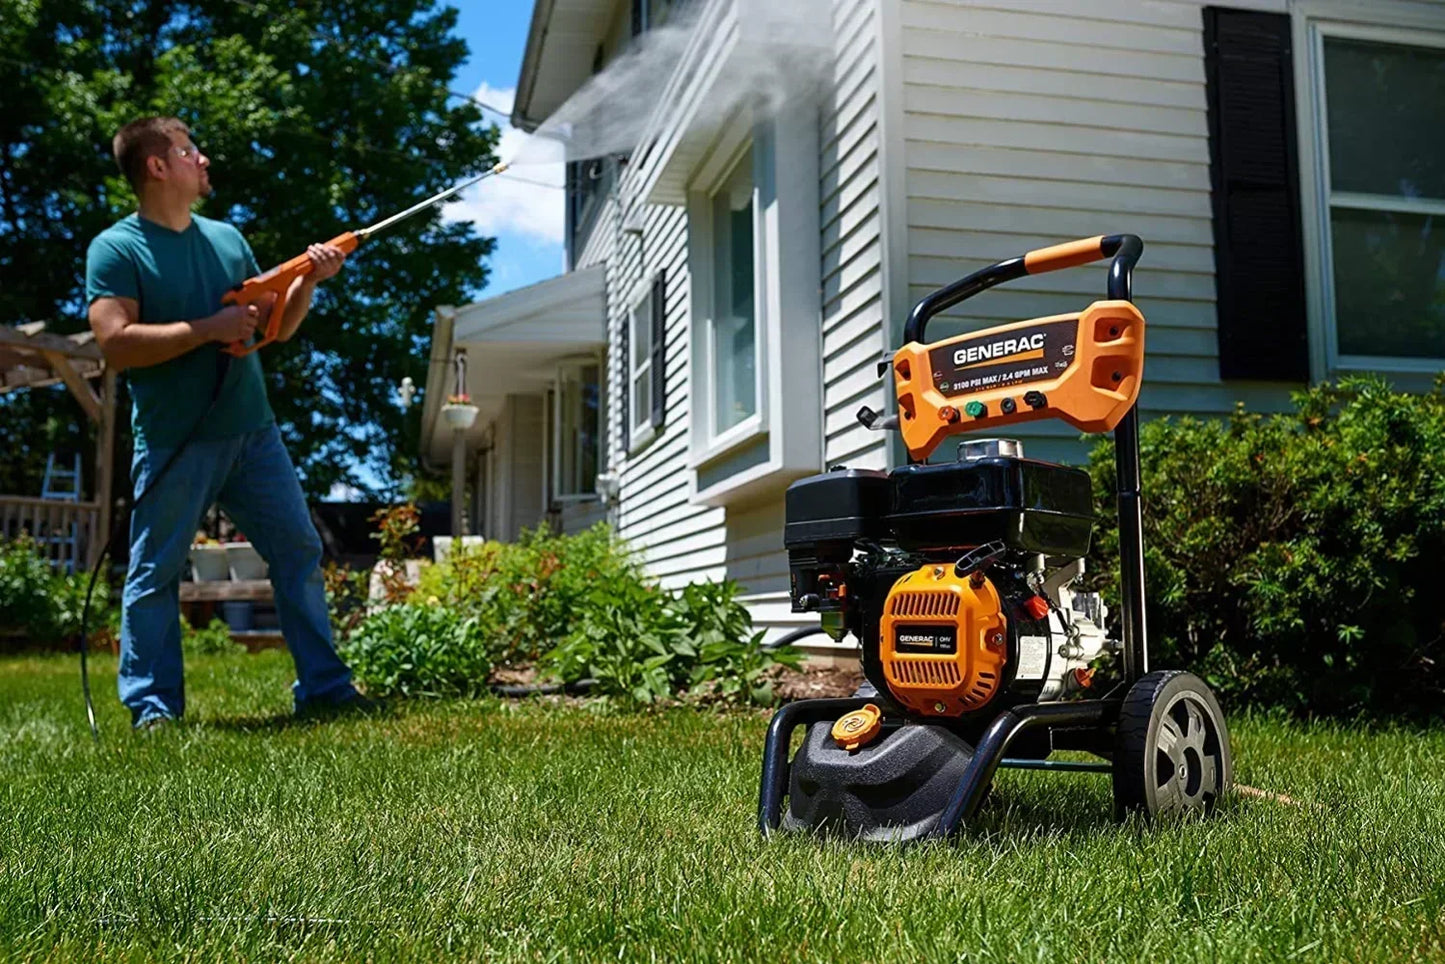 2700 PSI 1.2 GPM Electric-Powered Residential Pressure Washer, 50-State/CARB Compliant